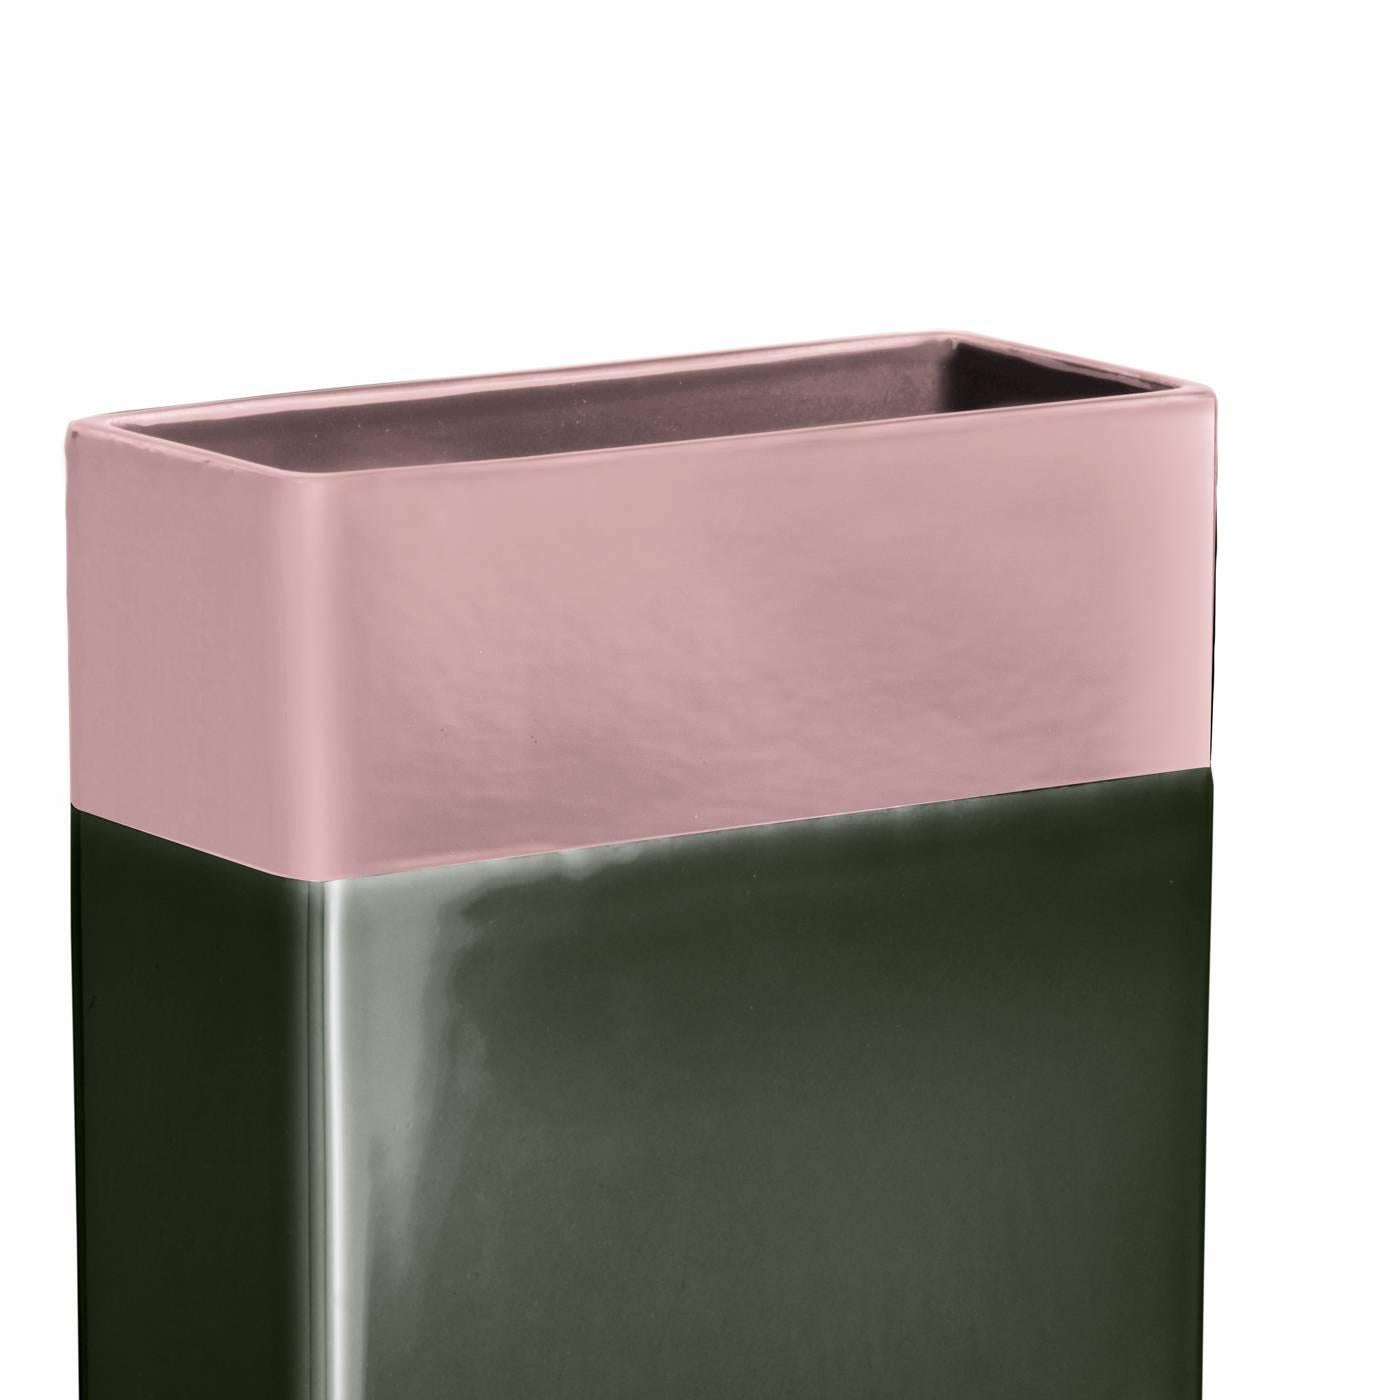 This modern vase features a striking tall rectangular construction and a contrasting color block pattern which was applied by hand. The top section of the vase is glazed in a delicate pink while the body is covered in a bold green glaze. The base of